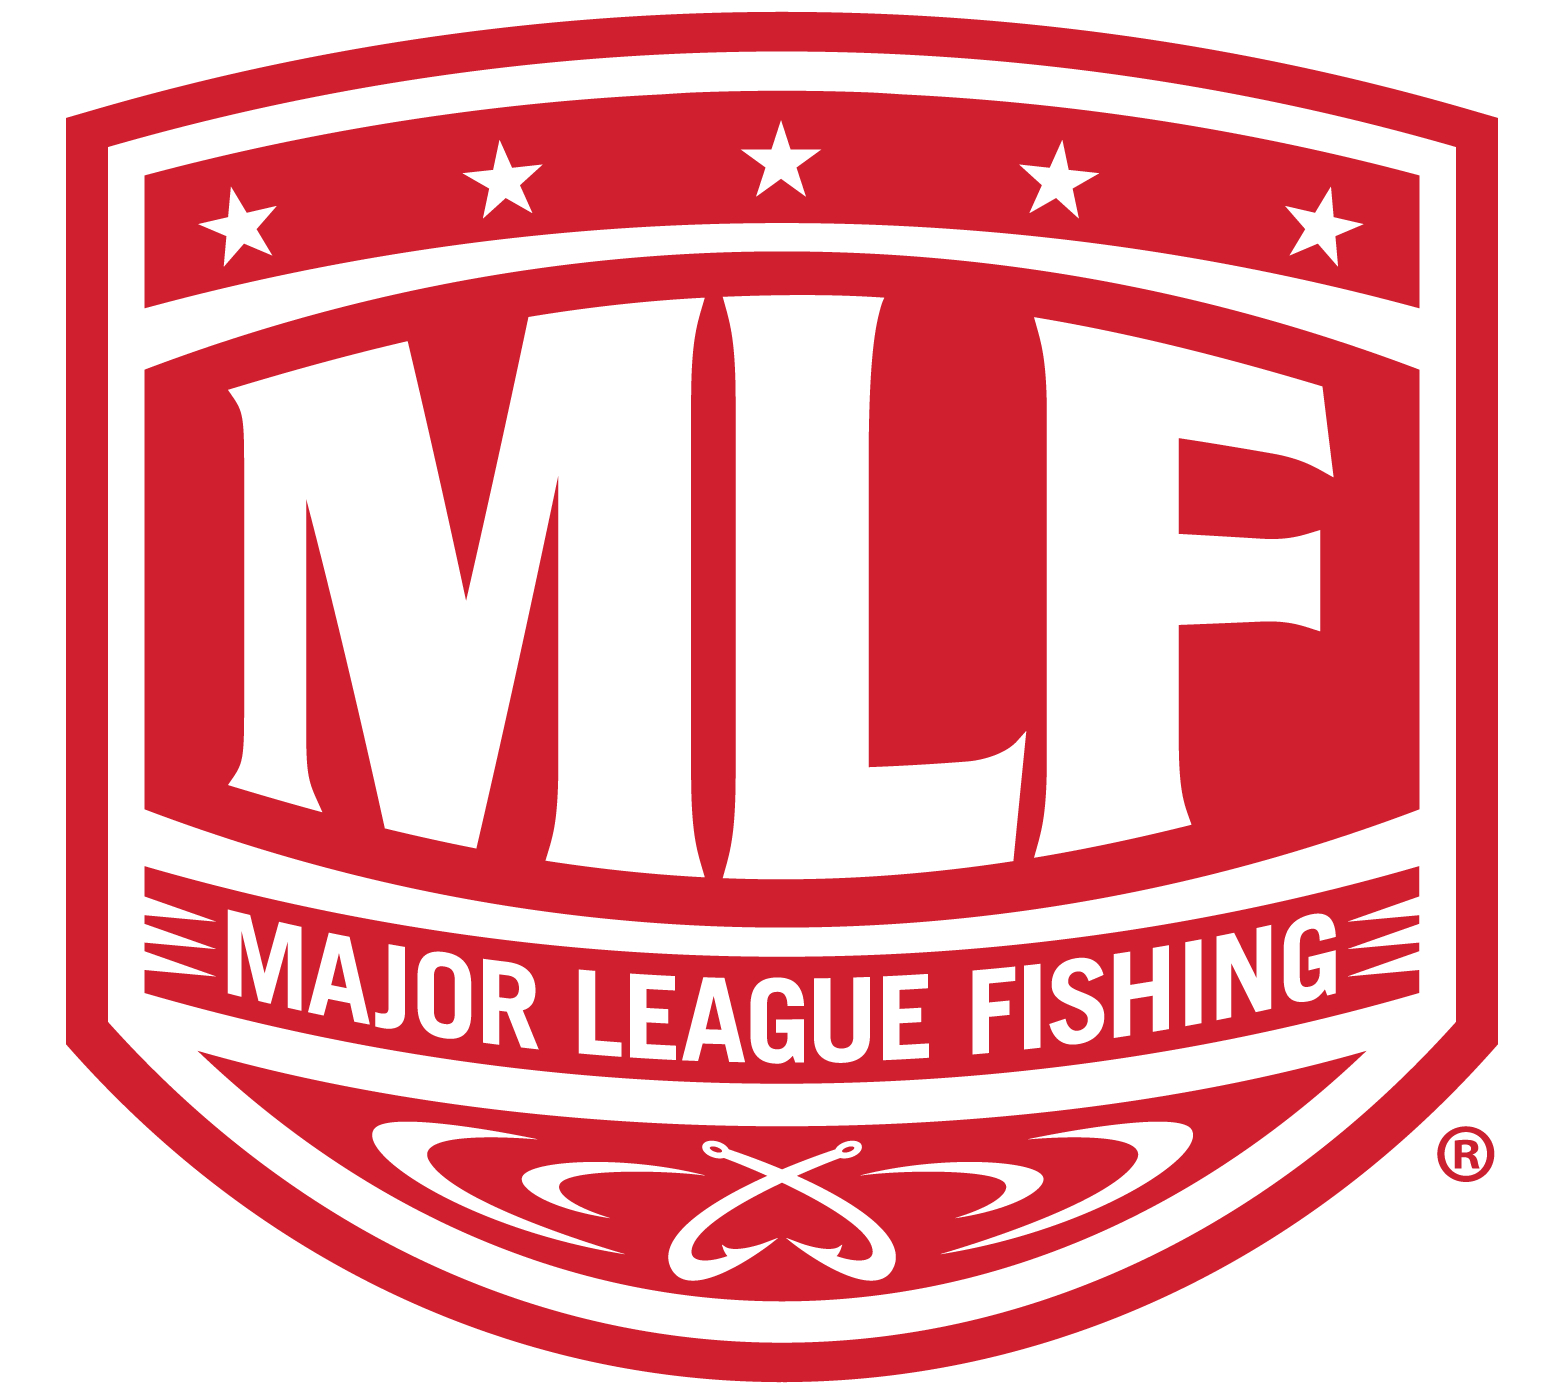 Tackle Warehouse Renews and Expands Sponsorship Agreement with MLF